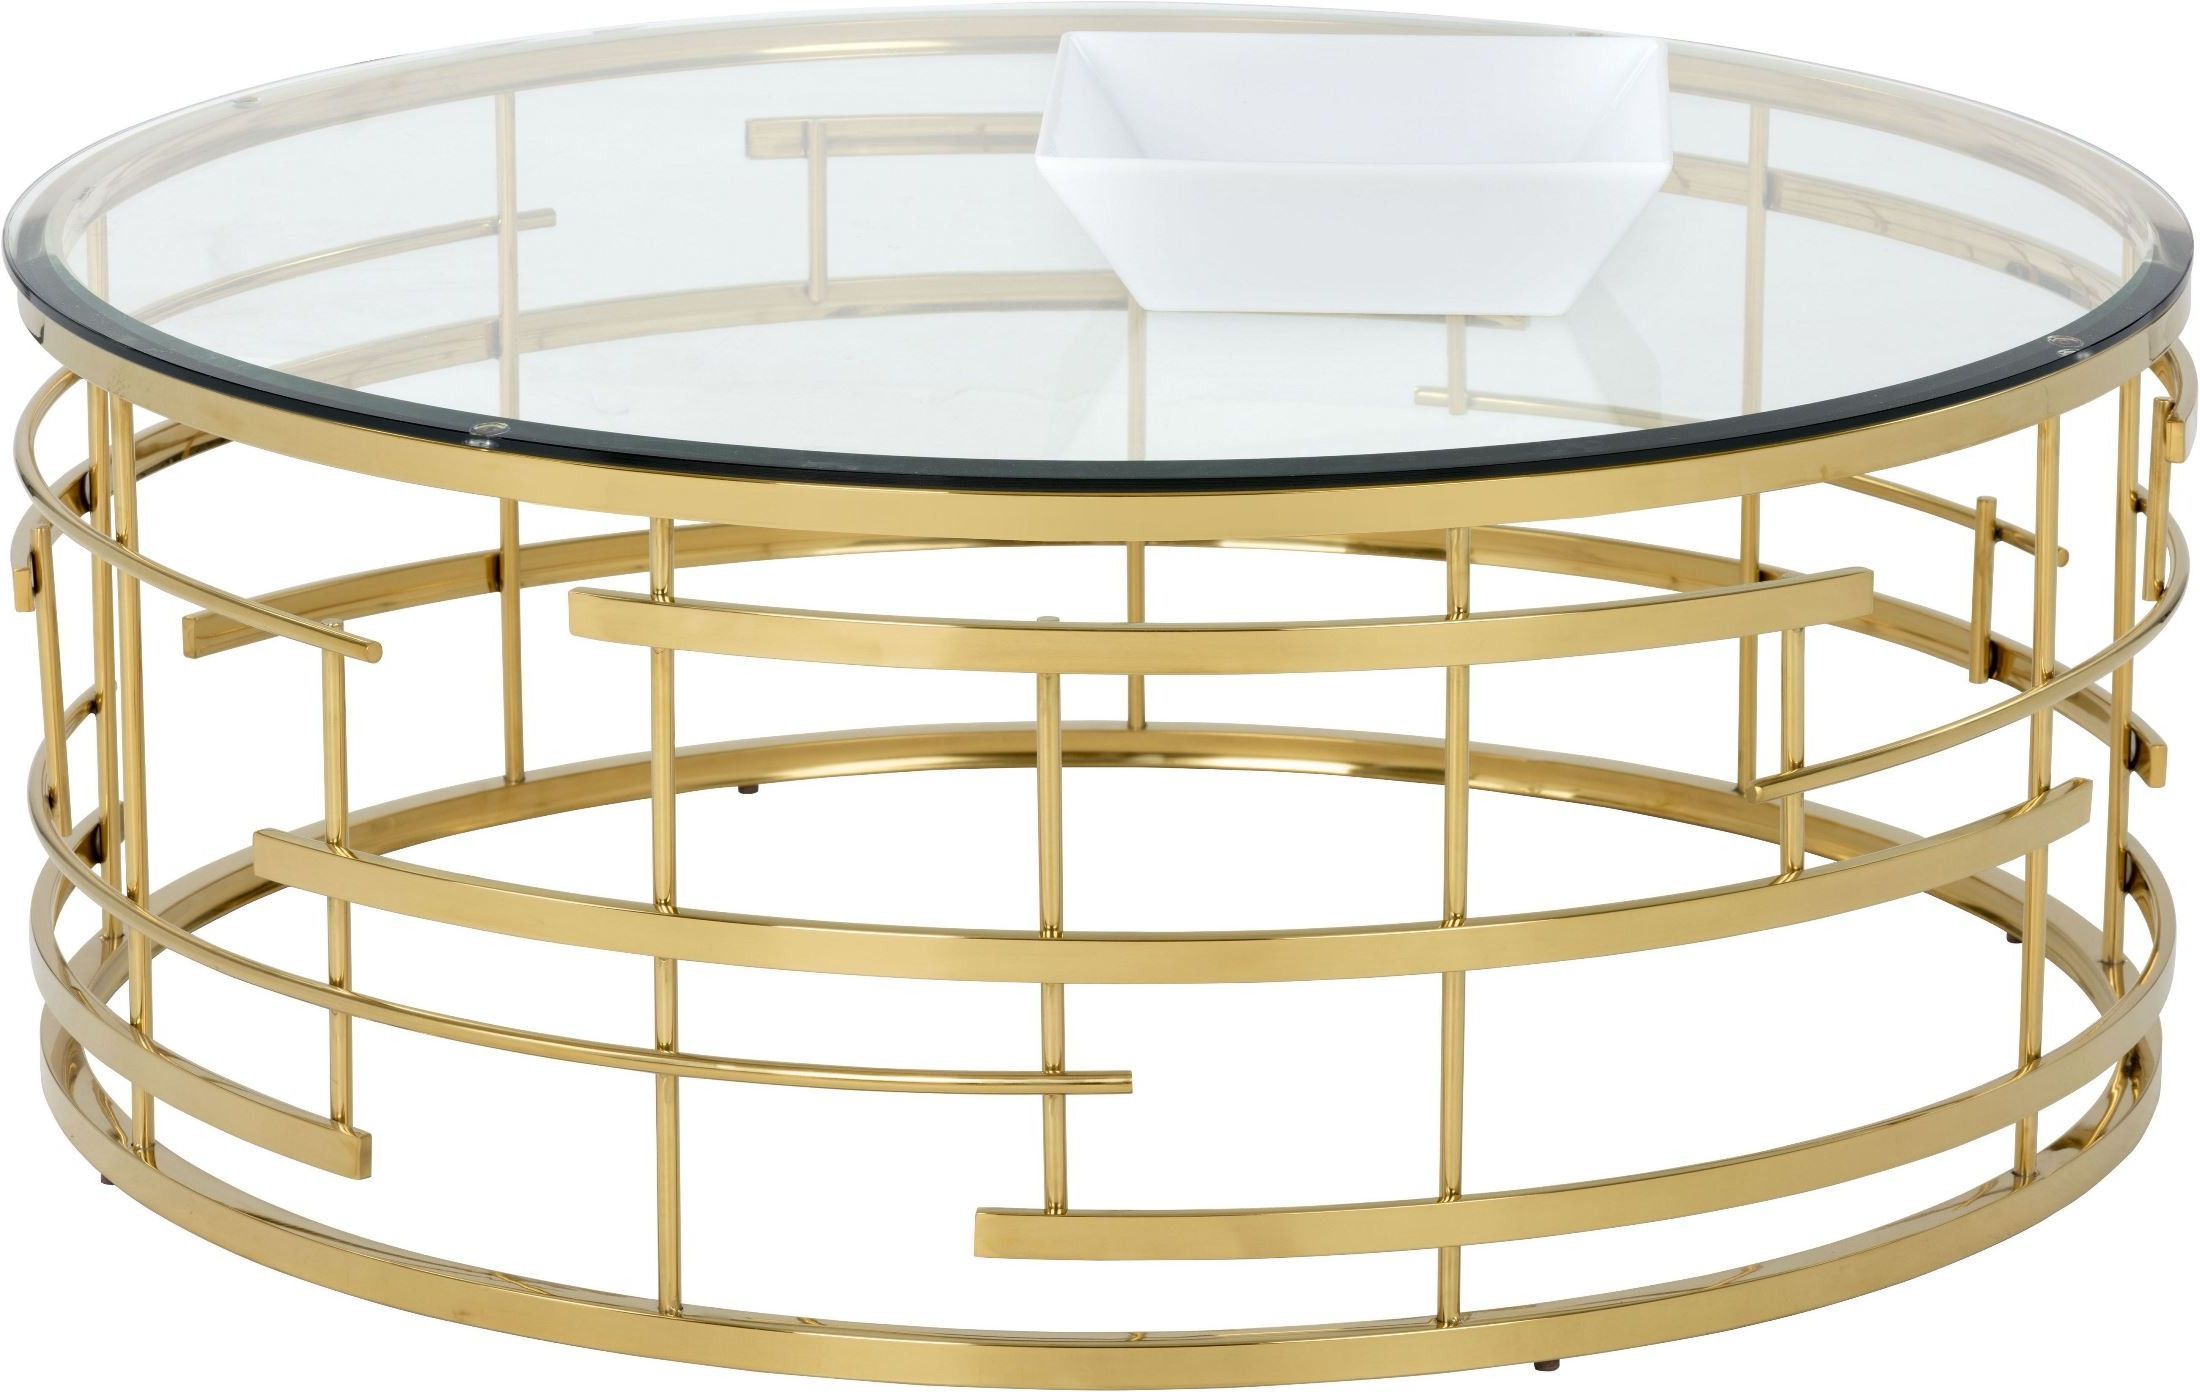 Antique Gold Aluminum Coffee Tables Pertaining To Trendy Cielo Gold Metal Coffee Table From Sunpan (View 10 of 10)